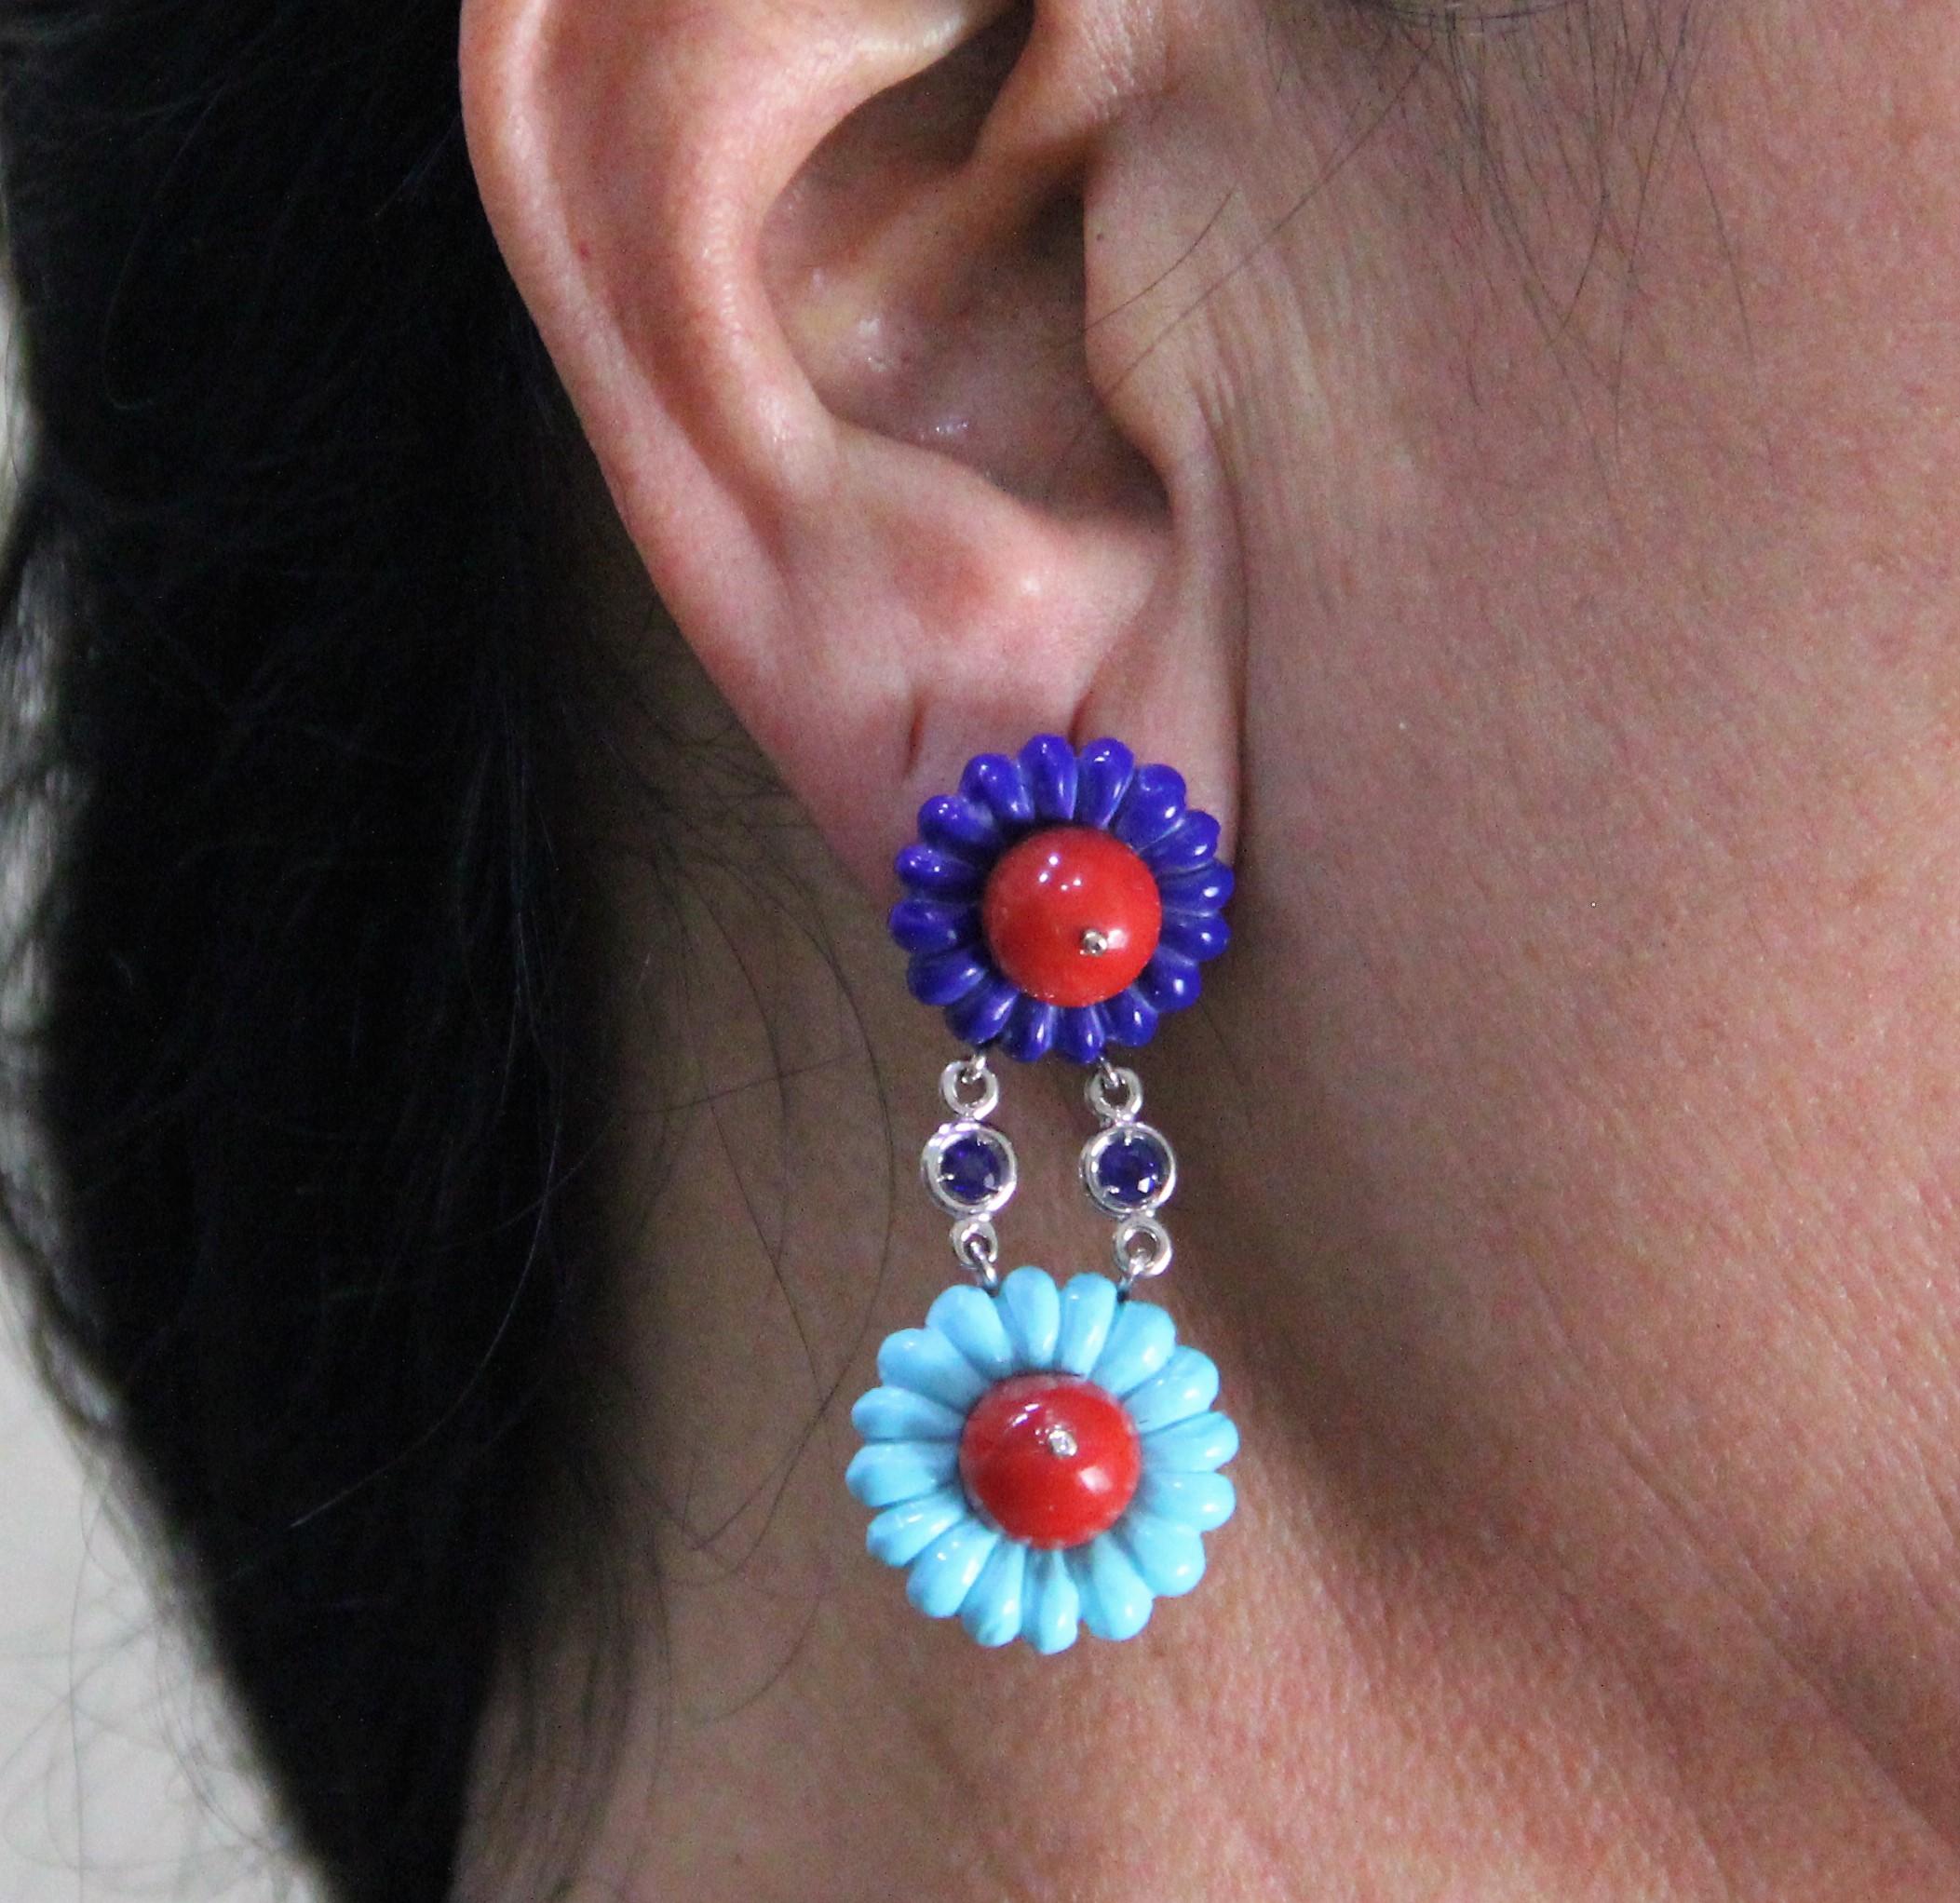 Coral,Turquoise,Lapis 18 Karat White Gold,Sapphires And Diamonds, Drop Earrings

Earrings Total weight 12.20 grams
Diamonds weight 0.03 karat
Sapphires weight 1 karat
Coral weight 3.40 grams